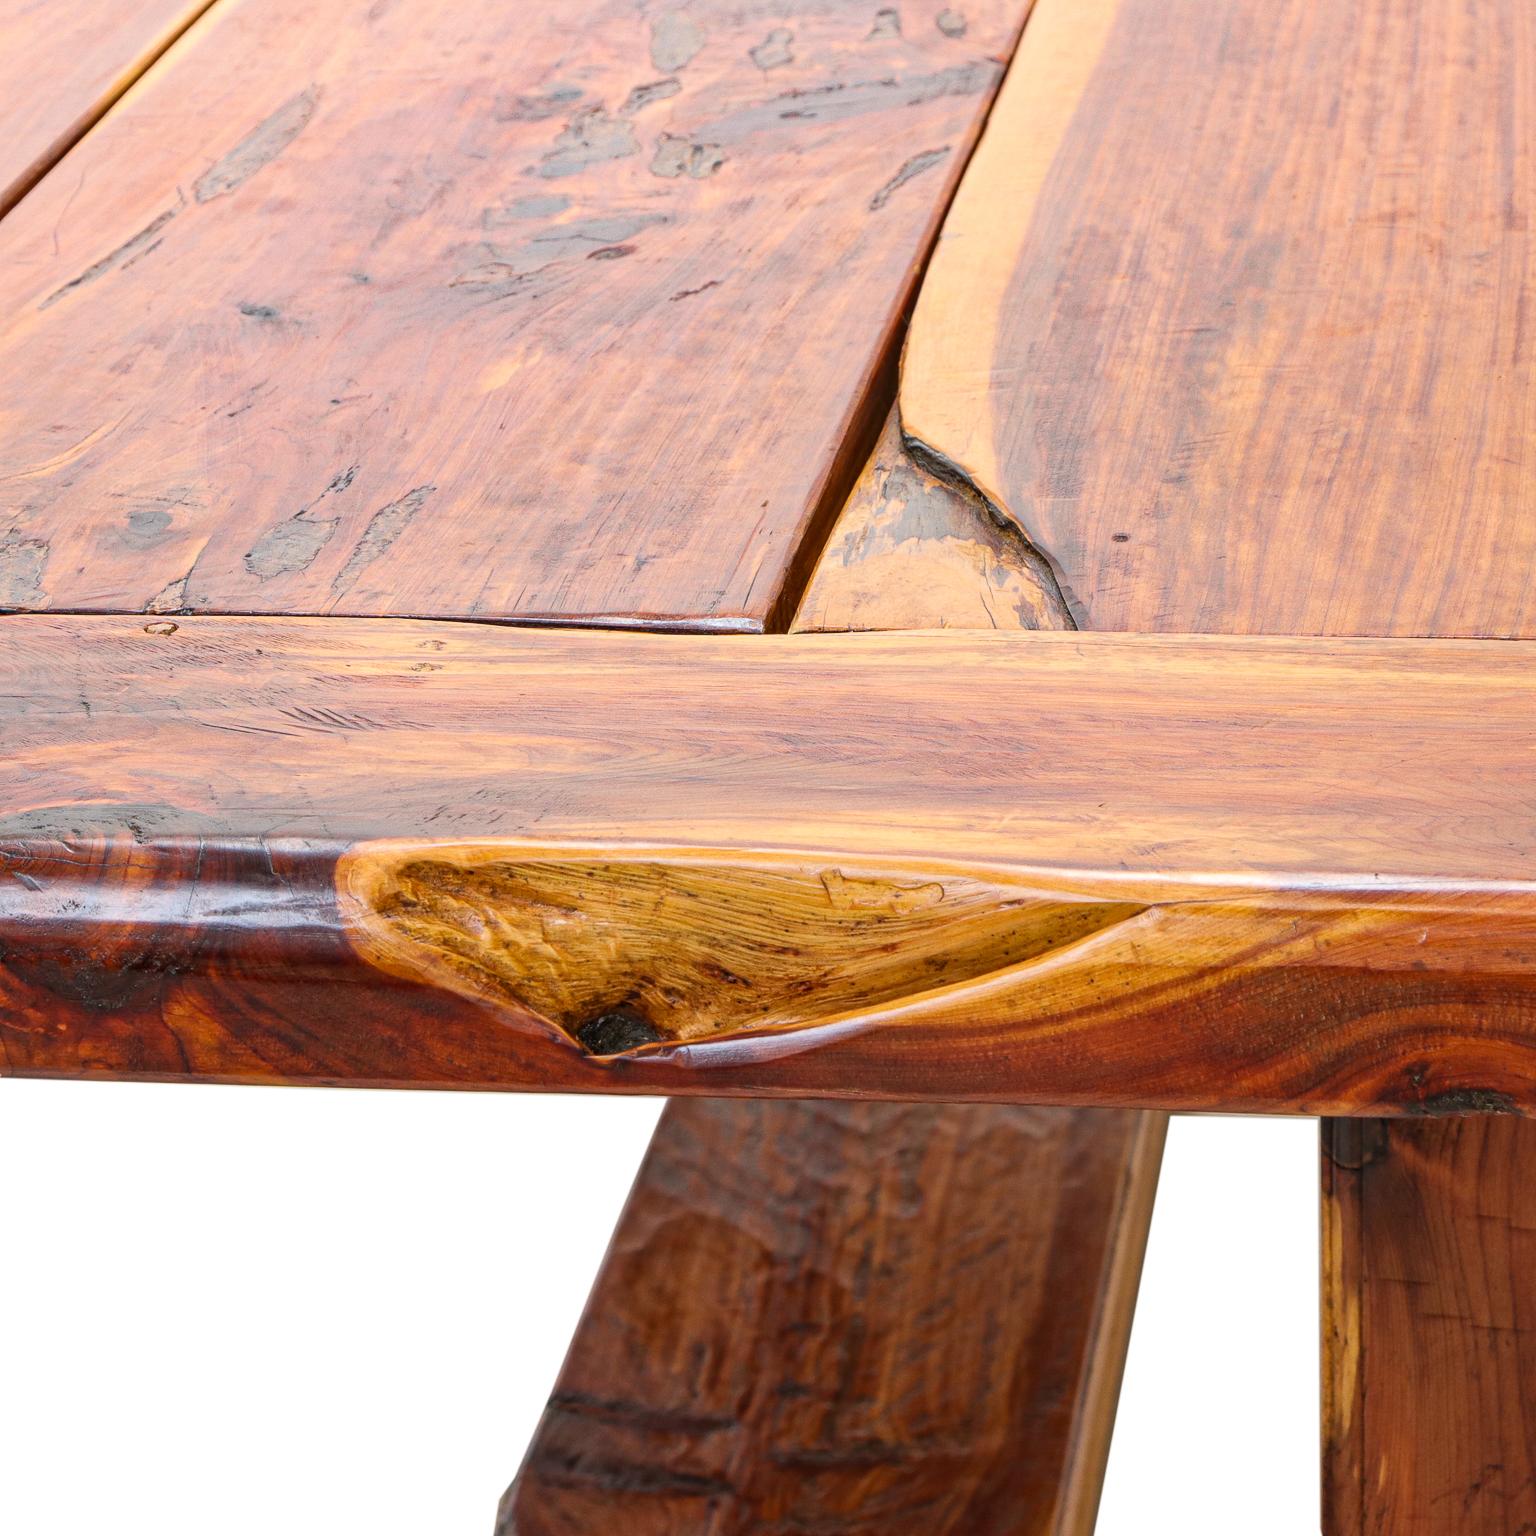 This live-edge cedar dining table which seats 10 people, was made in the beautiful mountains of East Tennessee all by hand and from raw materials. This cedar table is hand-made using no modern tools and was made in the living history